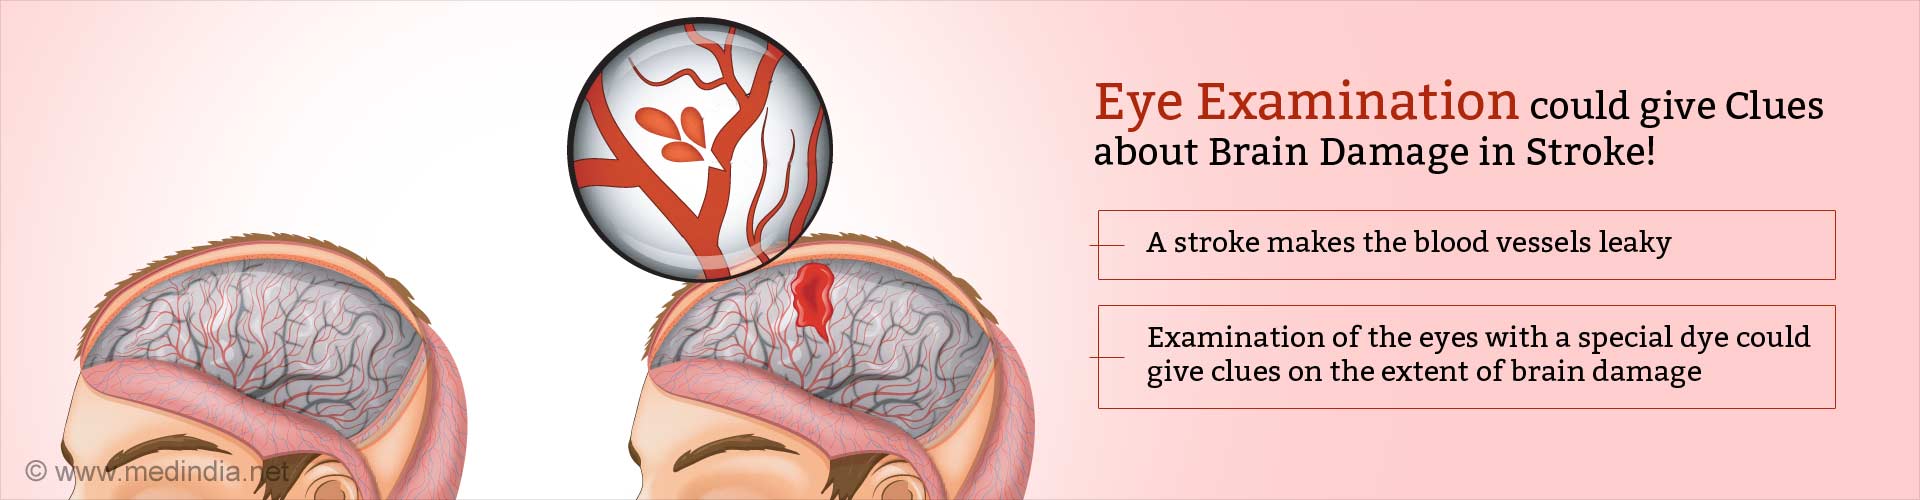 eye examination could give clues about brain damage in stroke
- a stroke make the blood vessels leaky
- examination of the eyes with a special dye could give clues on the extent of brain damage
